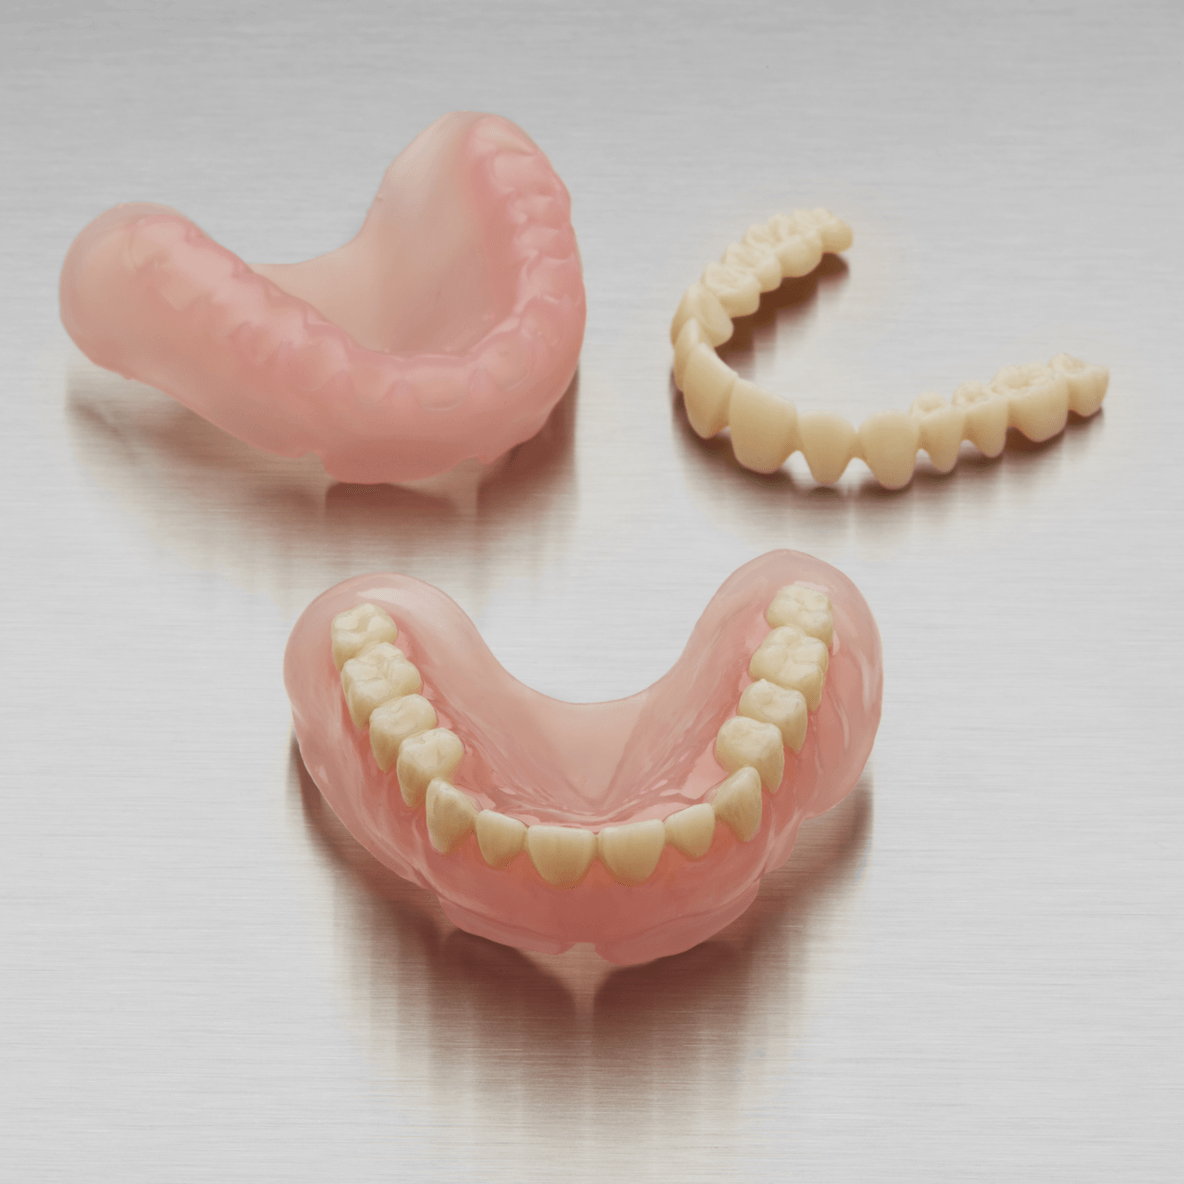 Three dentures are sitting on top of each other on a table.